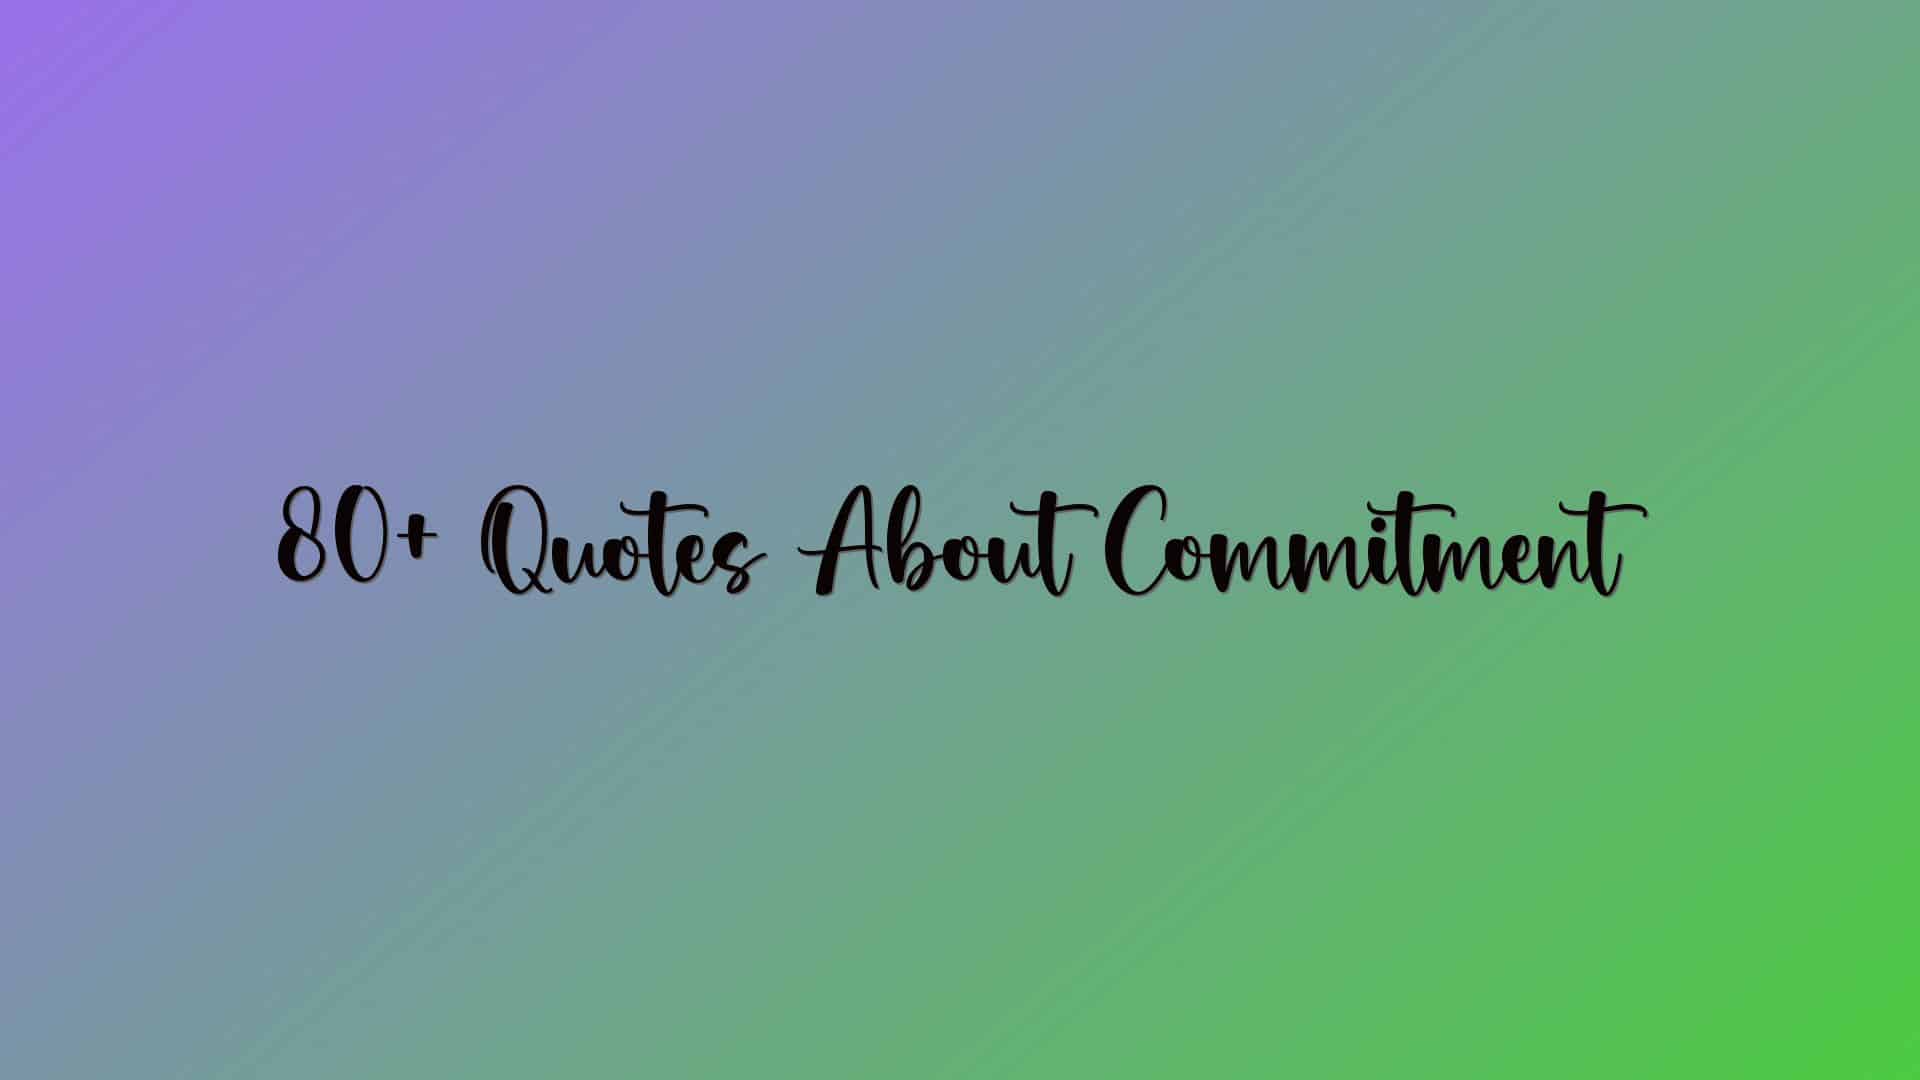 80+ Quotes About Commitment